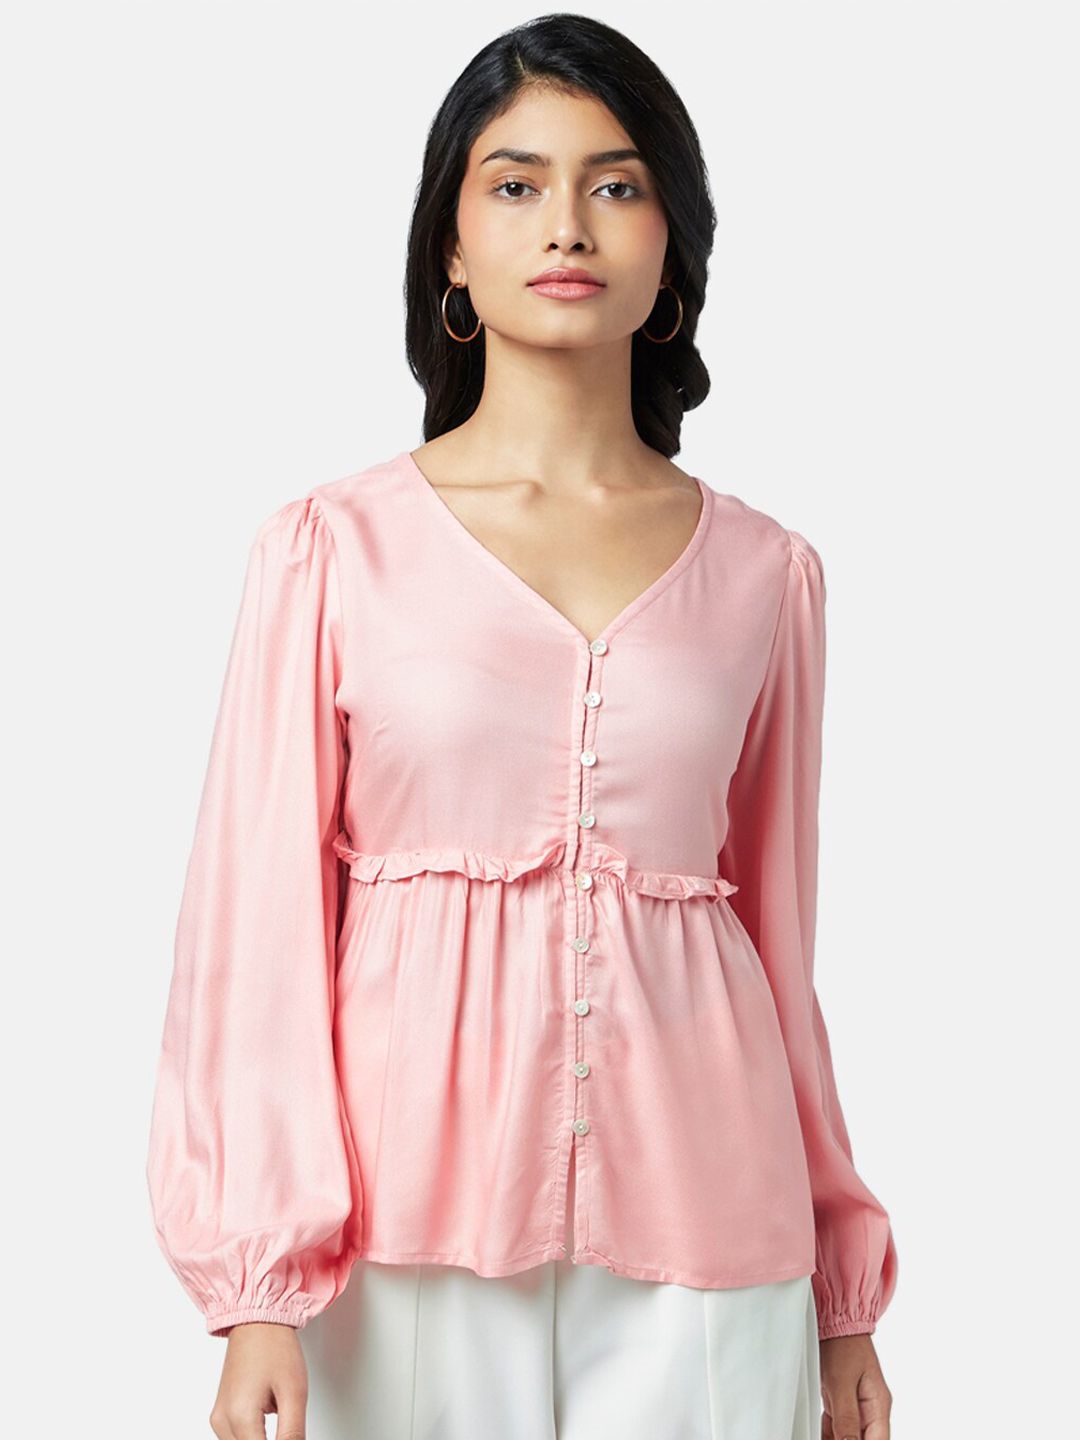 Honey by Pantaloons Pink Cinched Waist Top Price in India